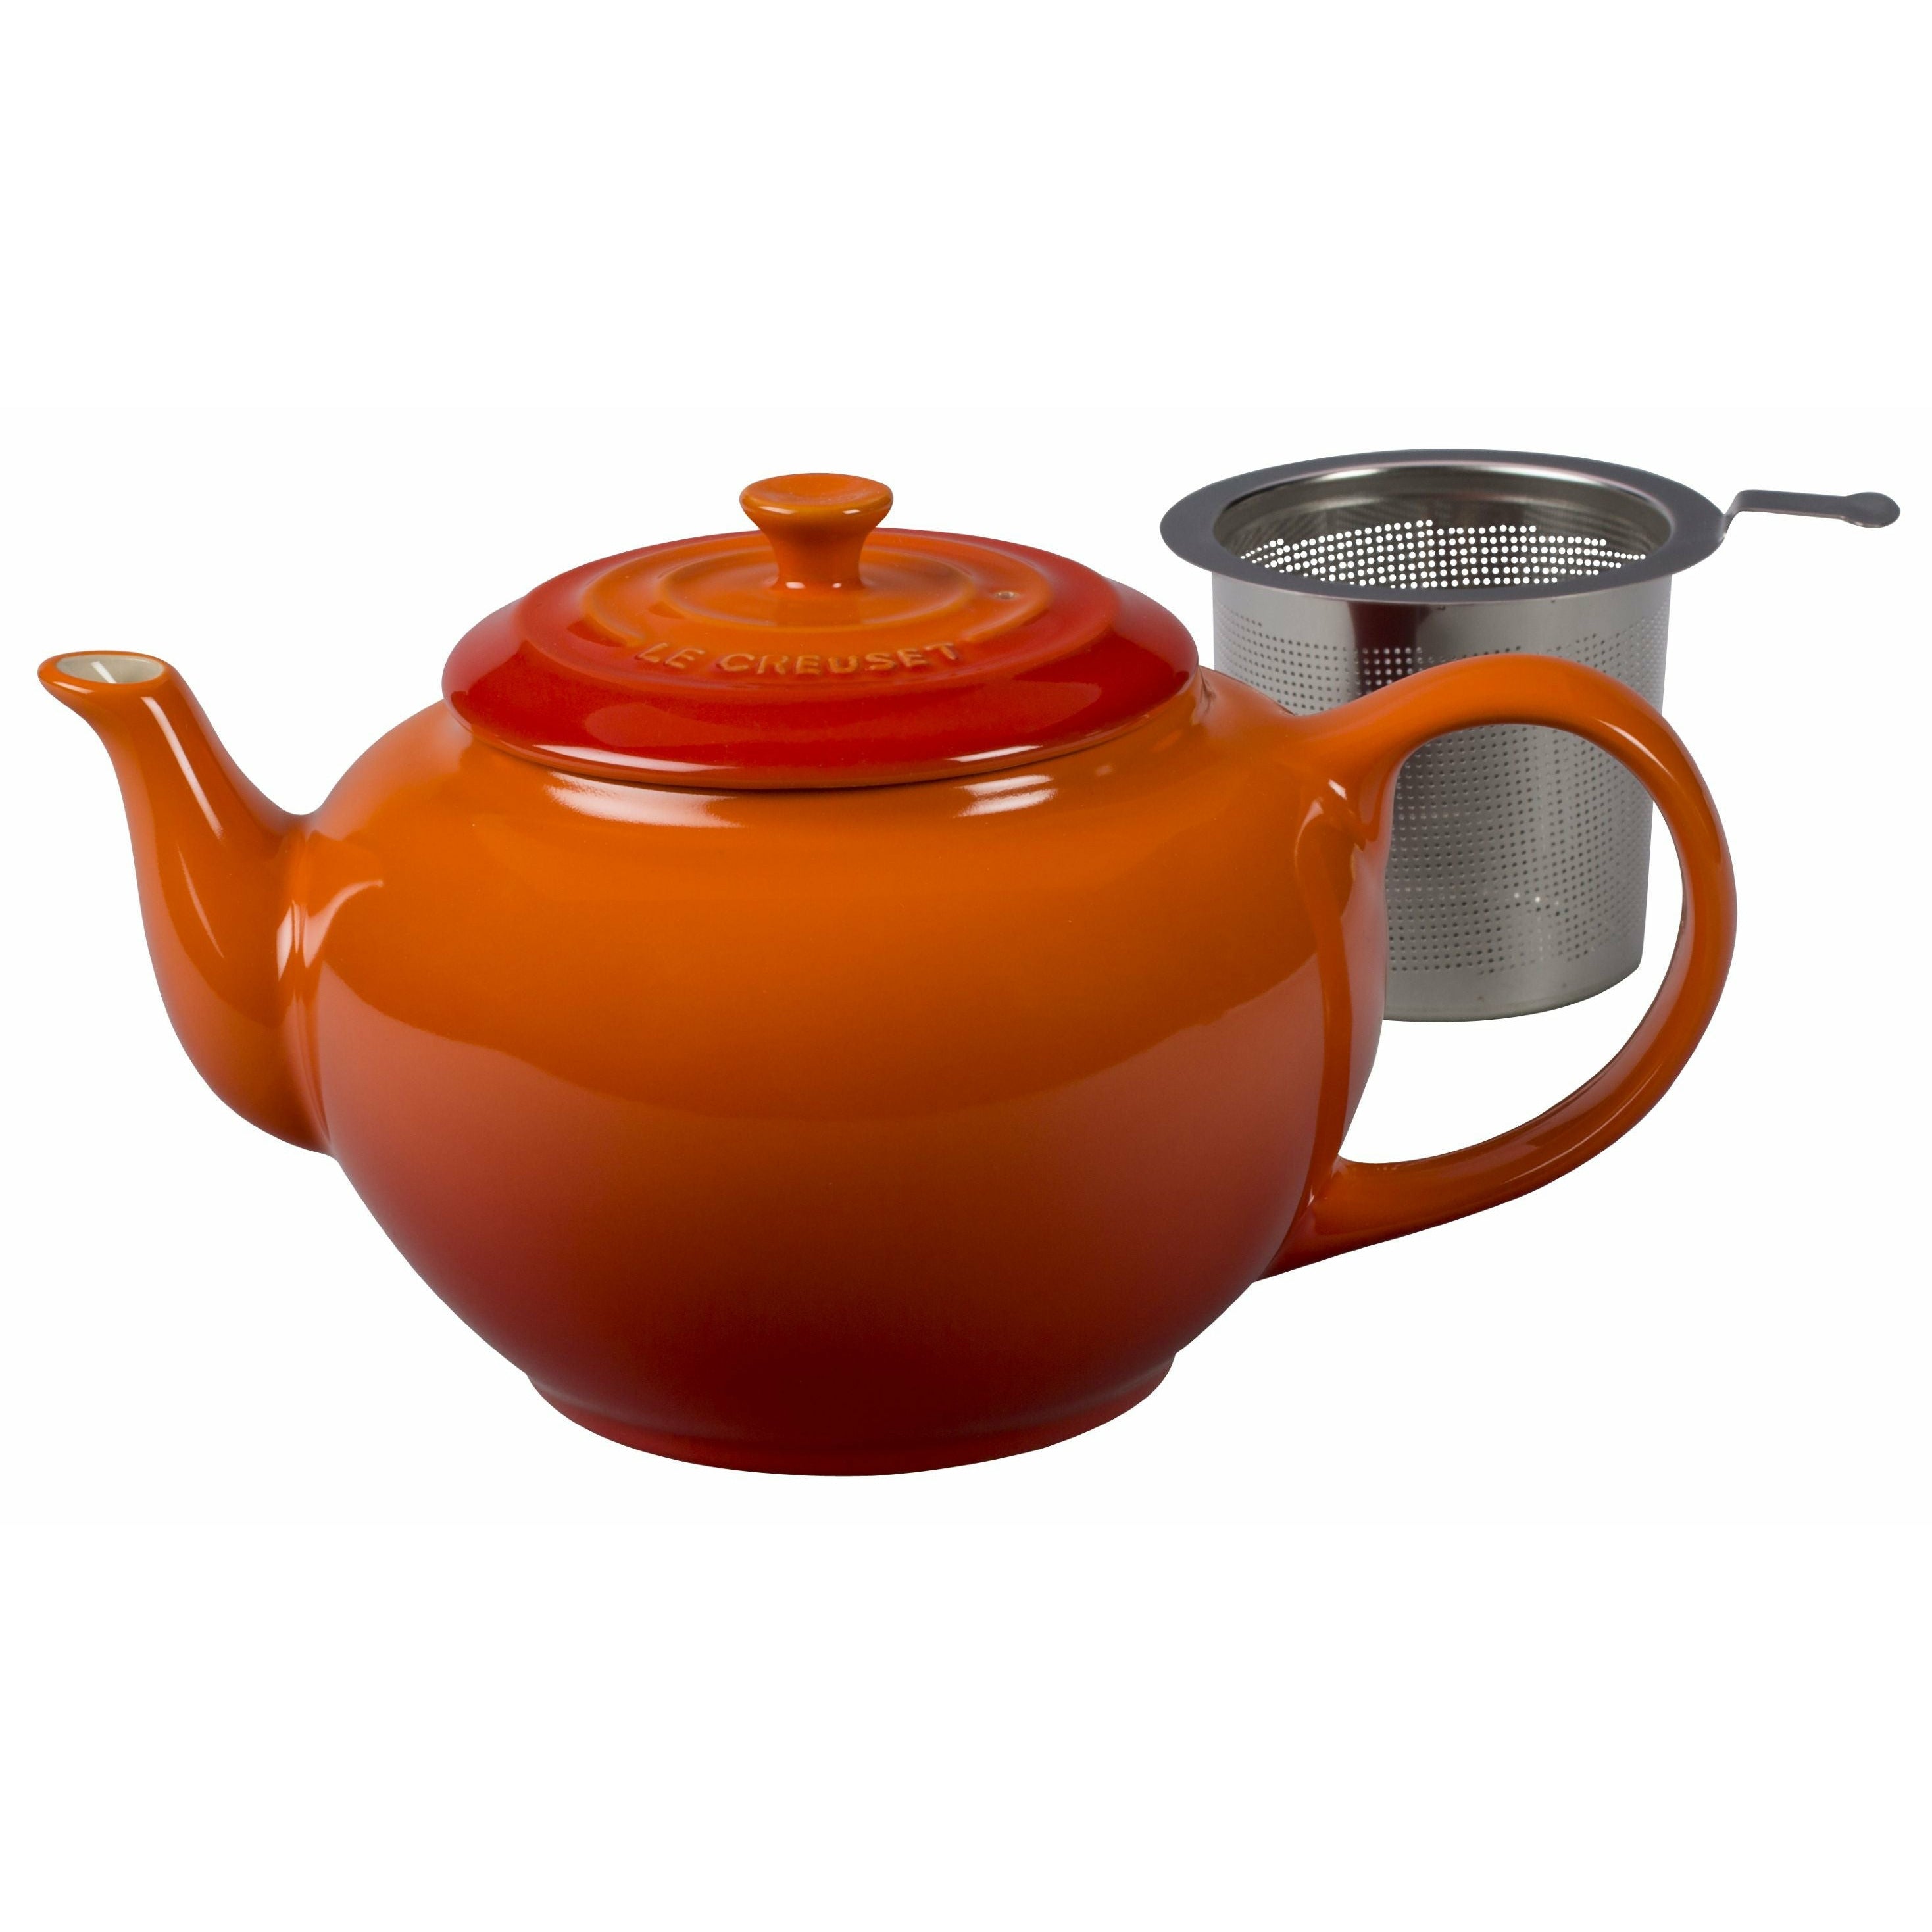 Le Creuset Classic Jug With Sieve 1.3 L, Oven Red